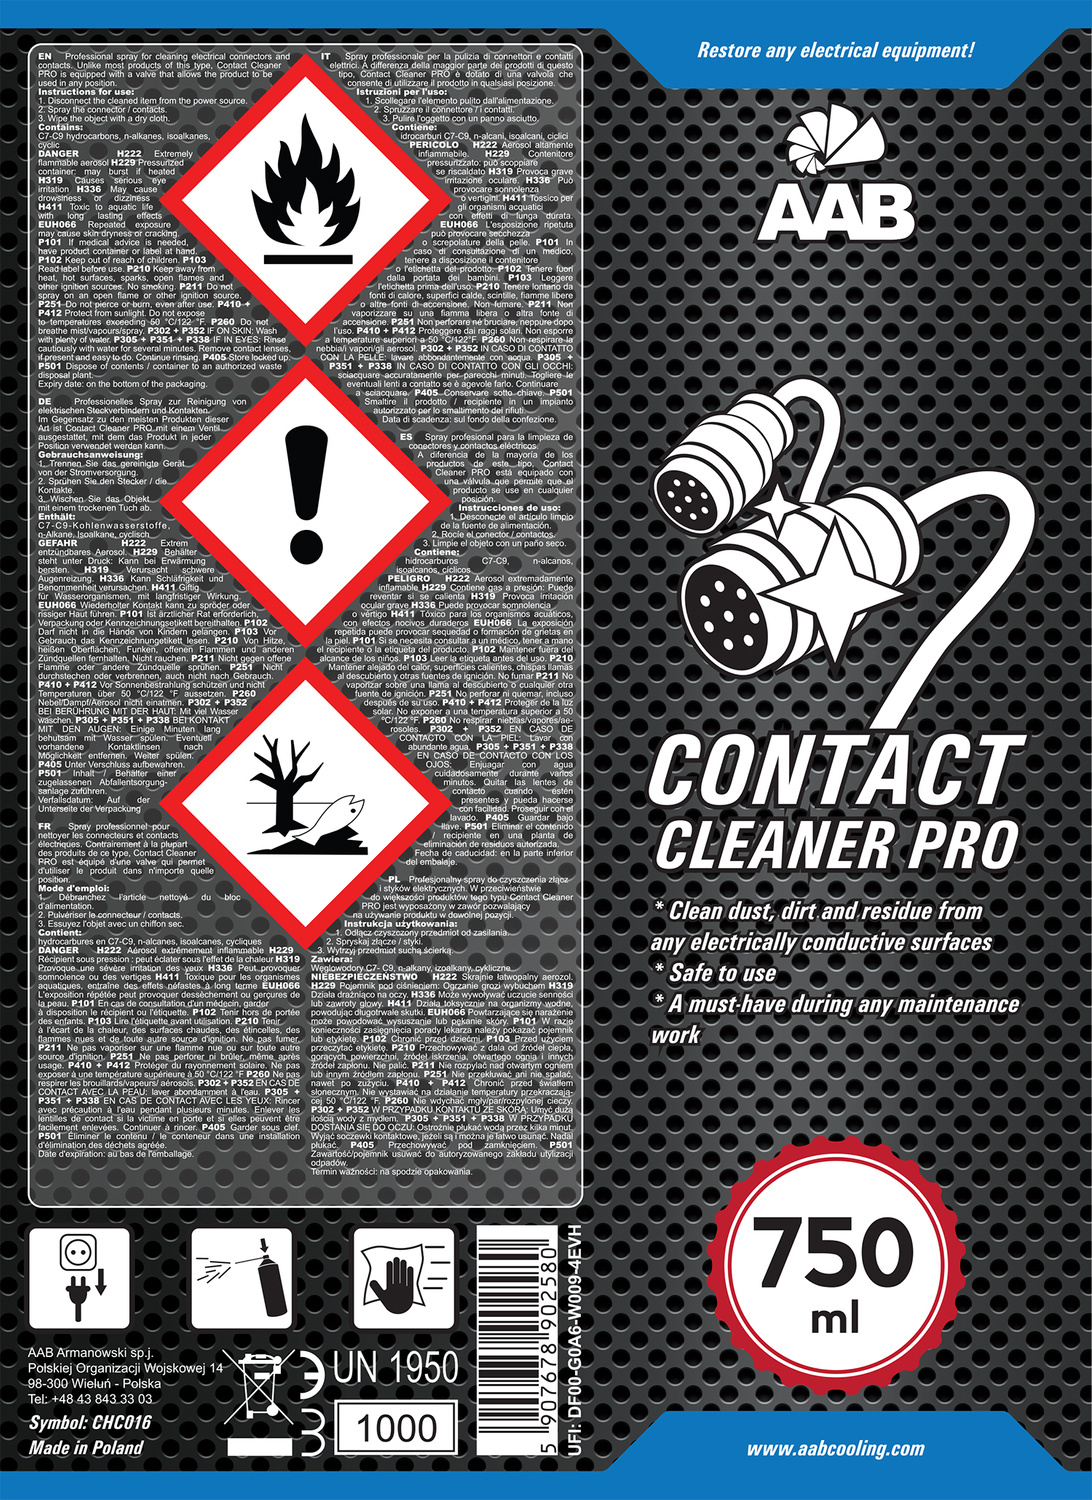 aab_contact_cleaner_pro_750_ml_dsc_1839_9